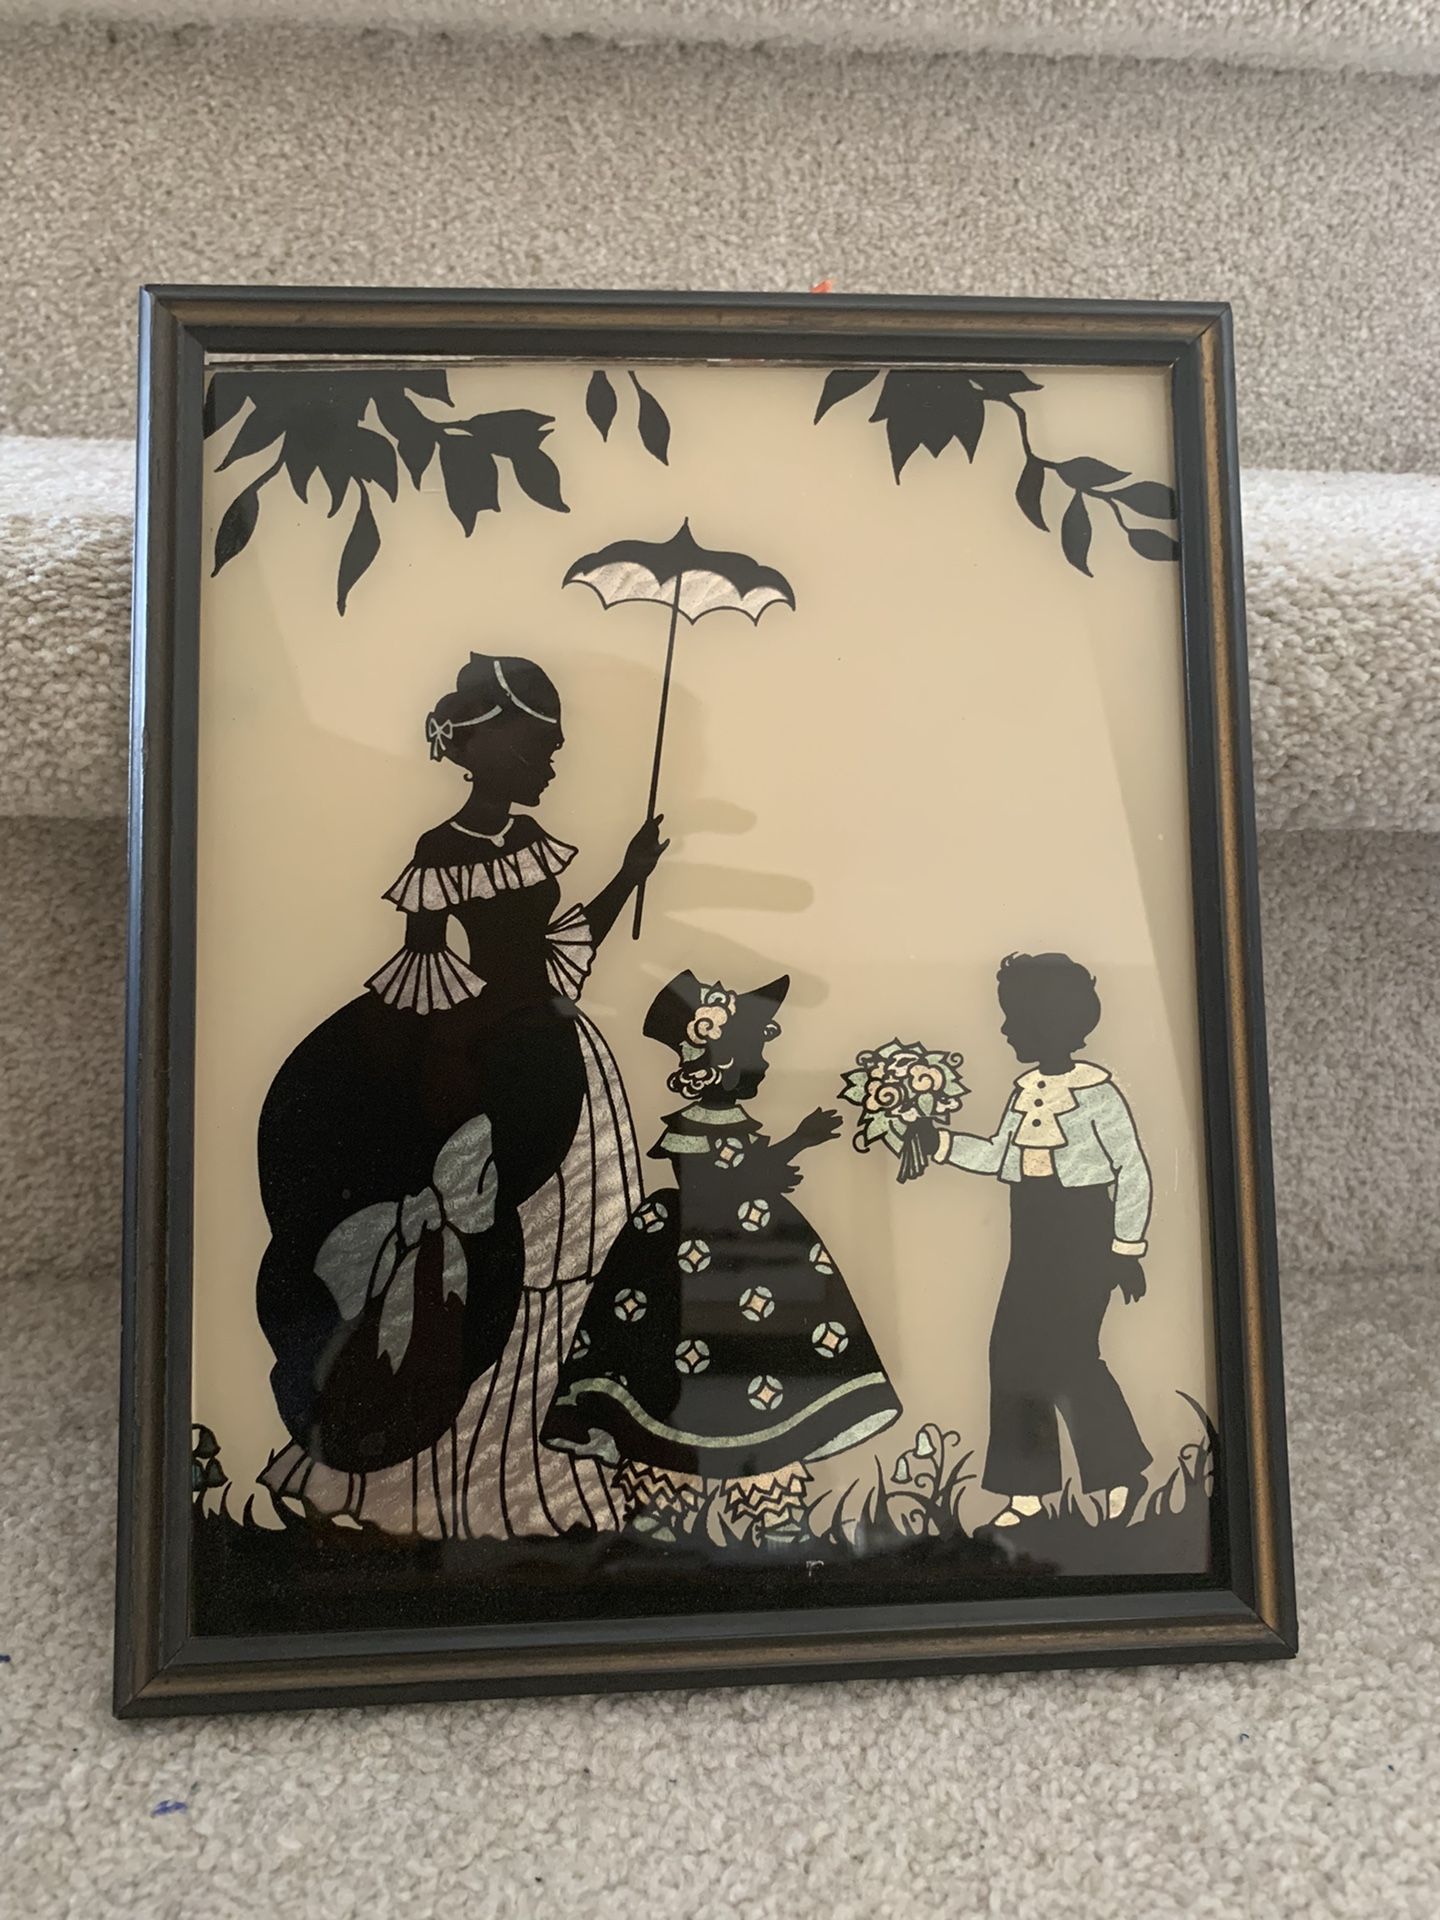 1930’s Butterfly Win gs Effe cts Silhouette  Reverse Painting On Glass By Reliance  